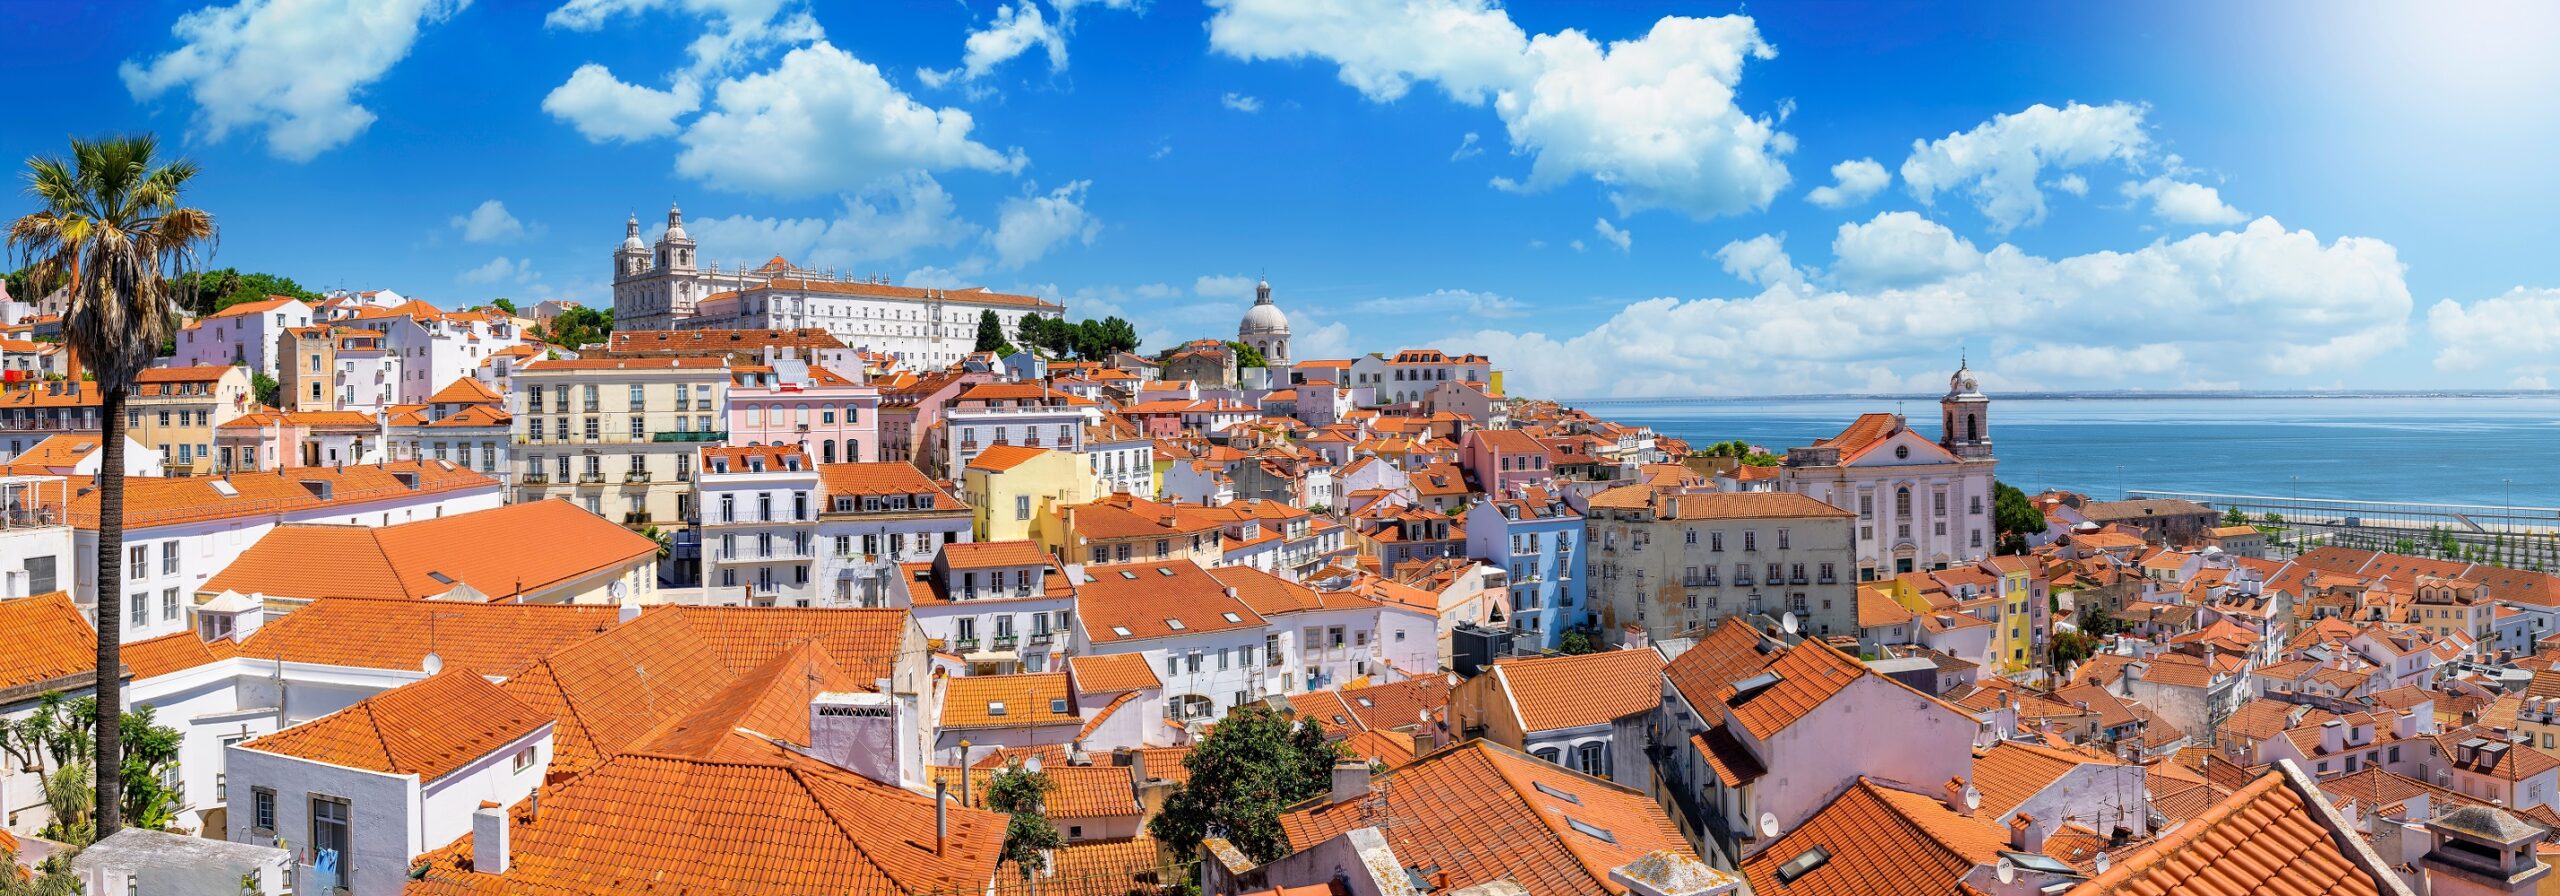 Weakness of the Euro makes European luxury properties more attractive to investors, especially those in Portugal